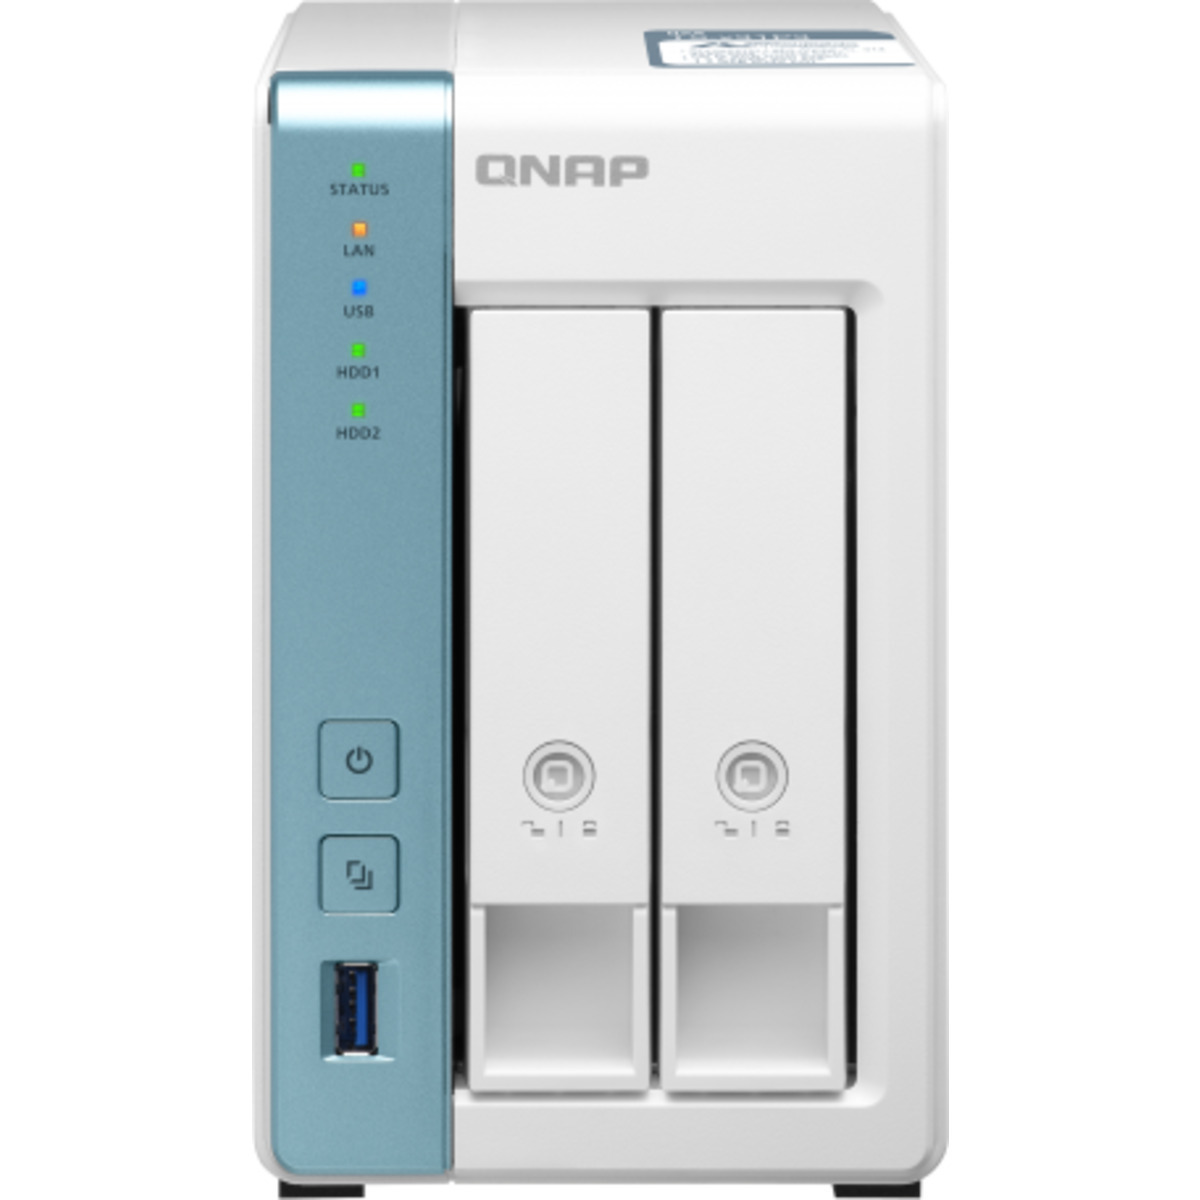 buy $1291 QNAP TS-231P3 20tb Desktop NAS - Network Attached Storage Device 2x10000gb Western Digital Ultrastar DC HC510 HUH721010ALE600 3.5 7200rpm SATA 6Gb/s HDD ENTERPRISE Class Drives Installed - Burn-In Tested - FREE RAM UPGRADE - nas headquarters buy network attached storage server device das new raid-5 free shipping usa christmas new year holiday sale TS-231P3